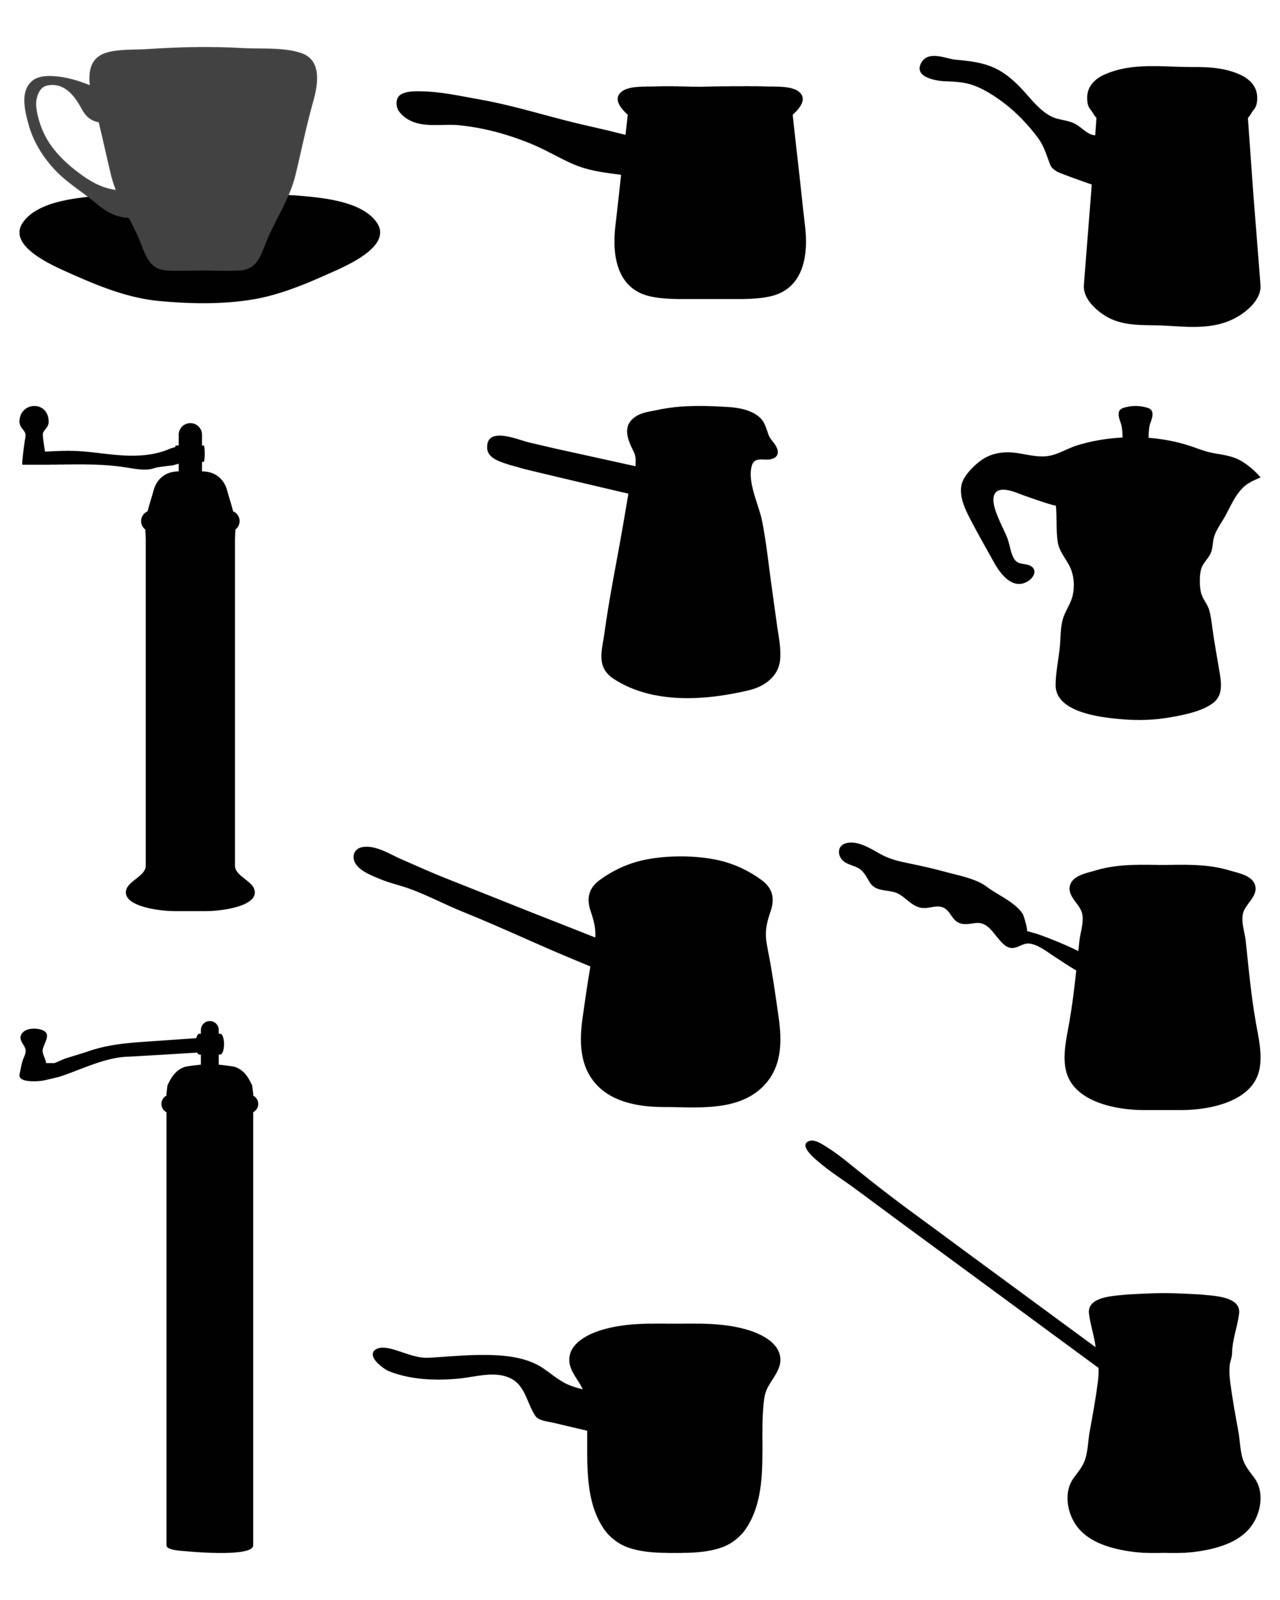 Black silhouettes of pot and grinder for coffee